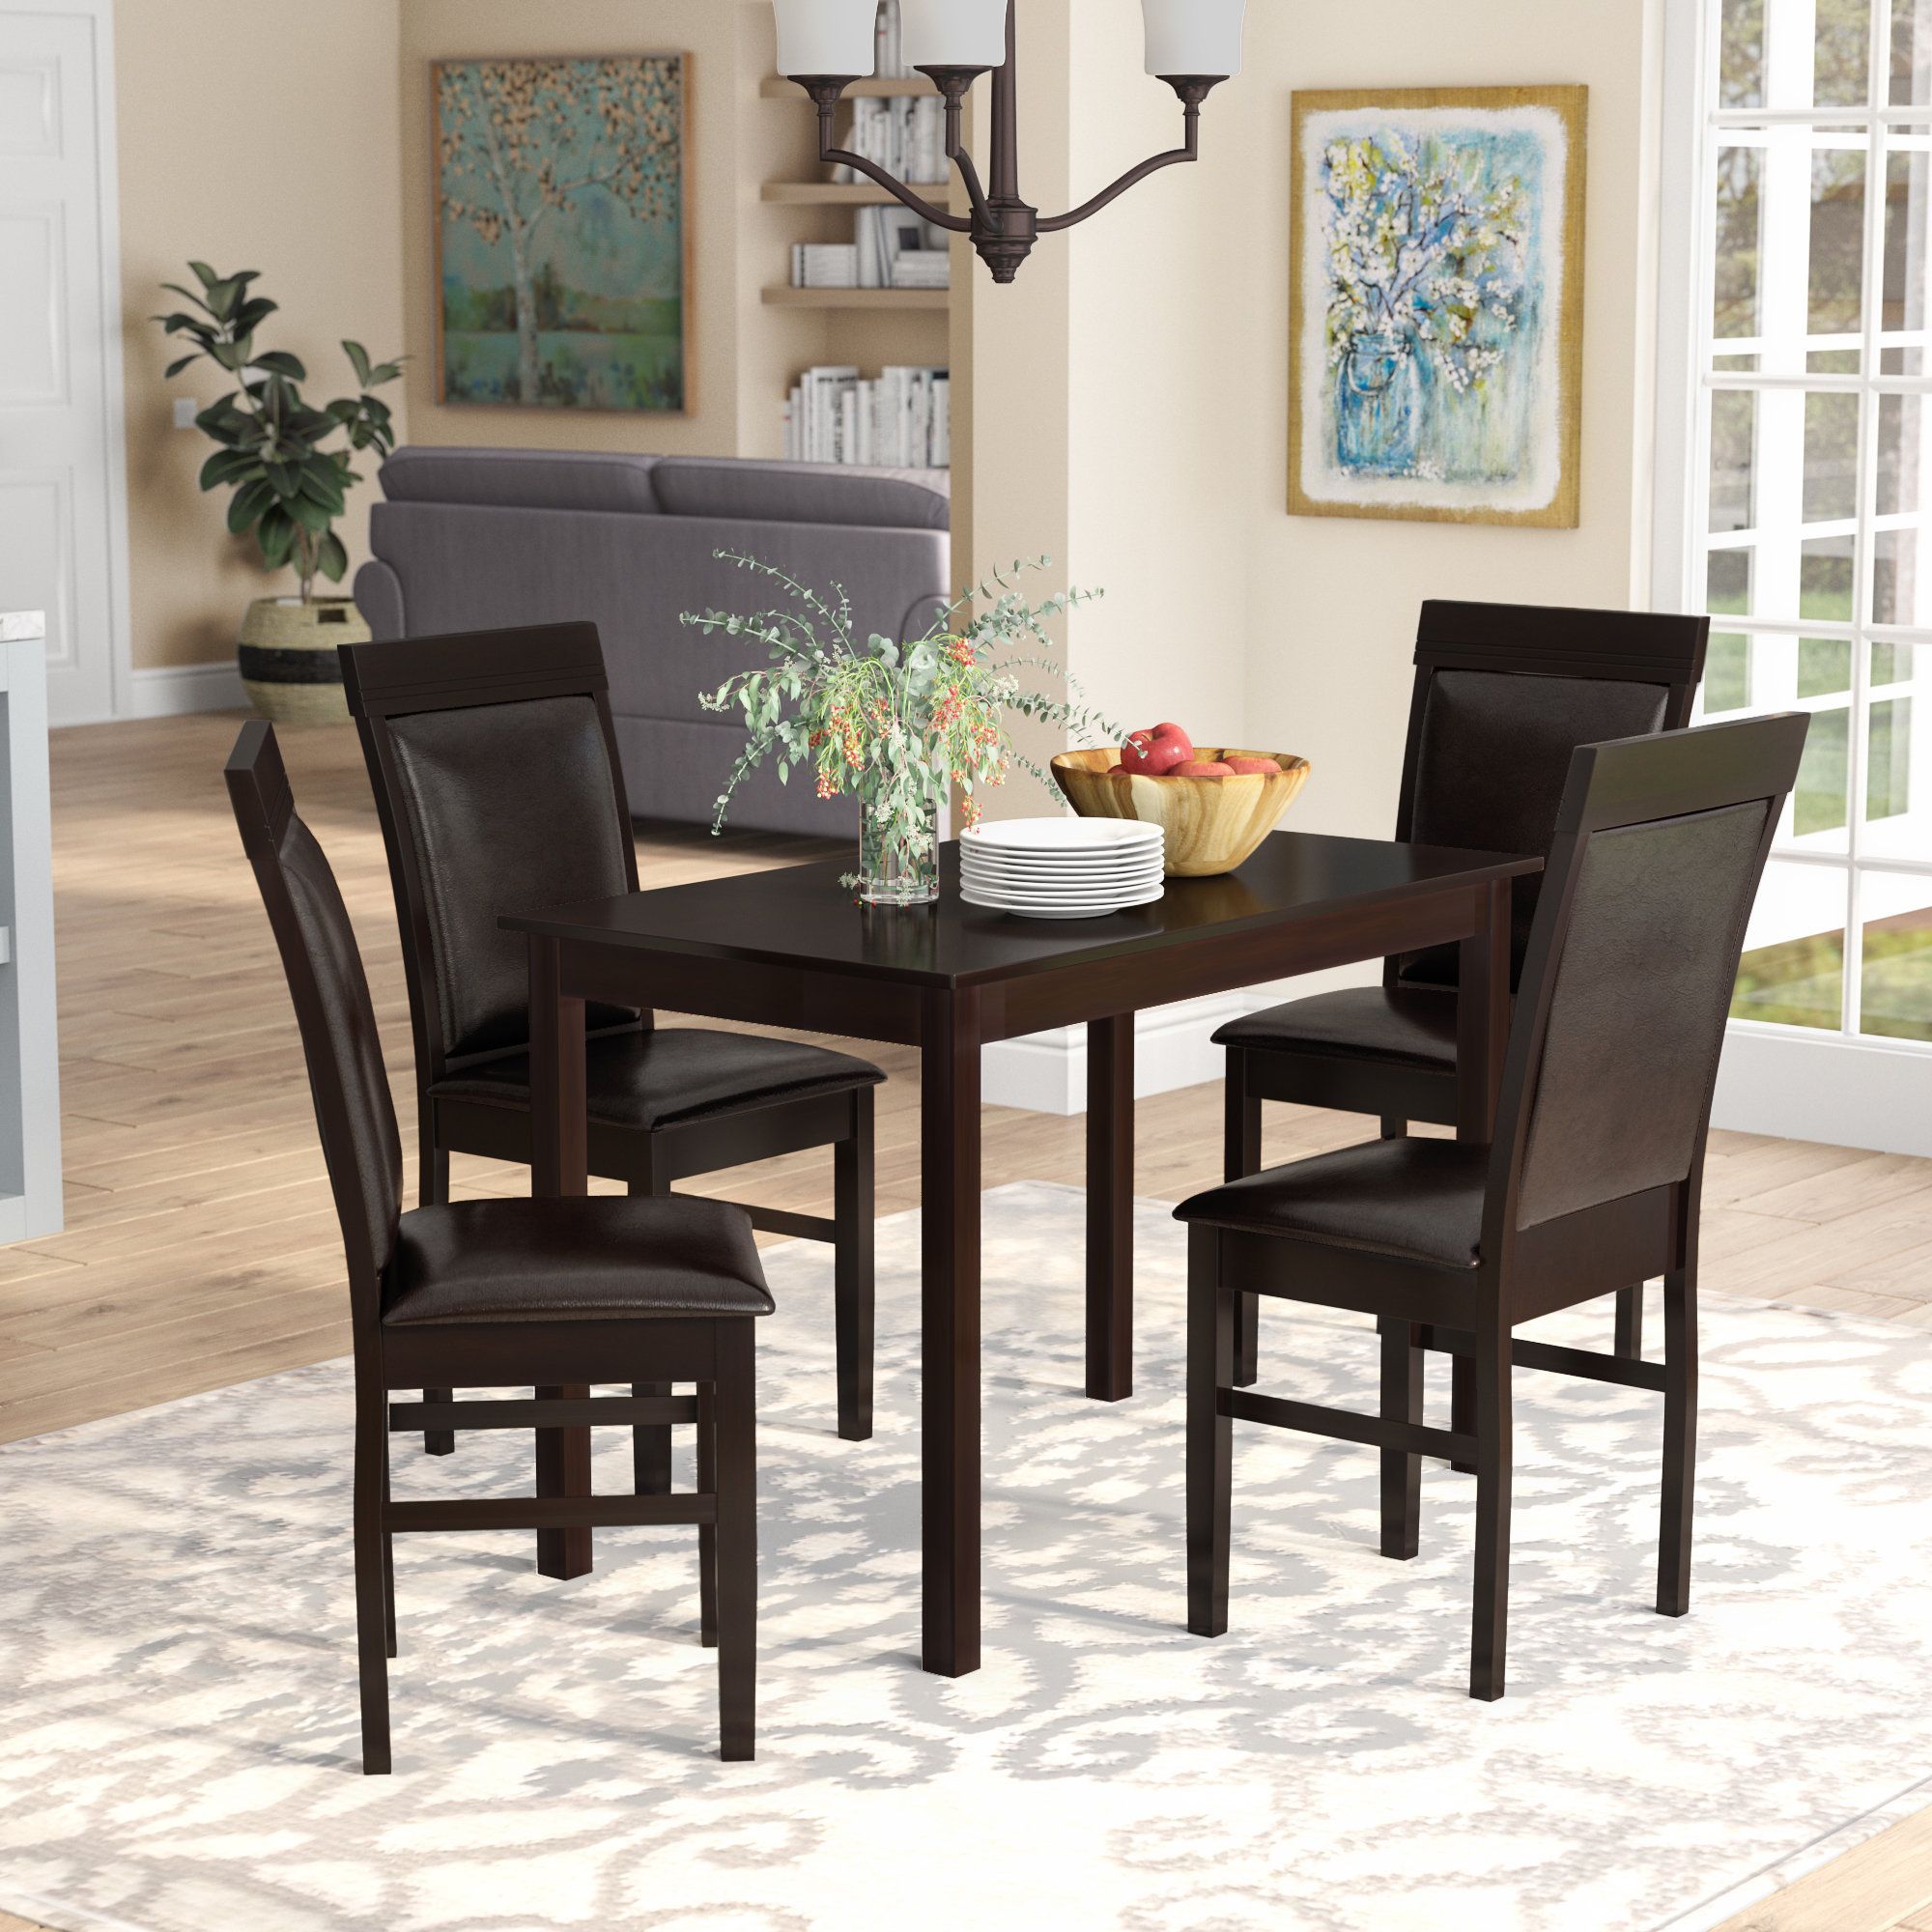 Trendy Red Barrel Studio Kisor Modern And Contemporary 5 Piece Breakfast Inside 5 Piece Breakfast Nook Dining Sets (View 3 of 20)